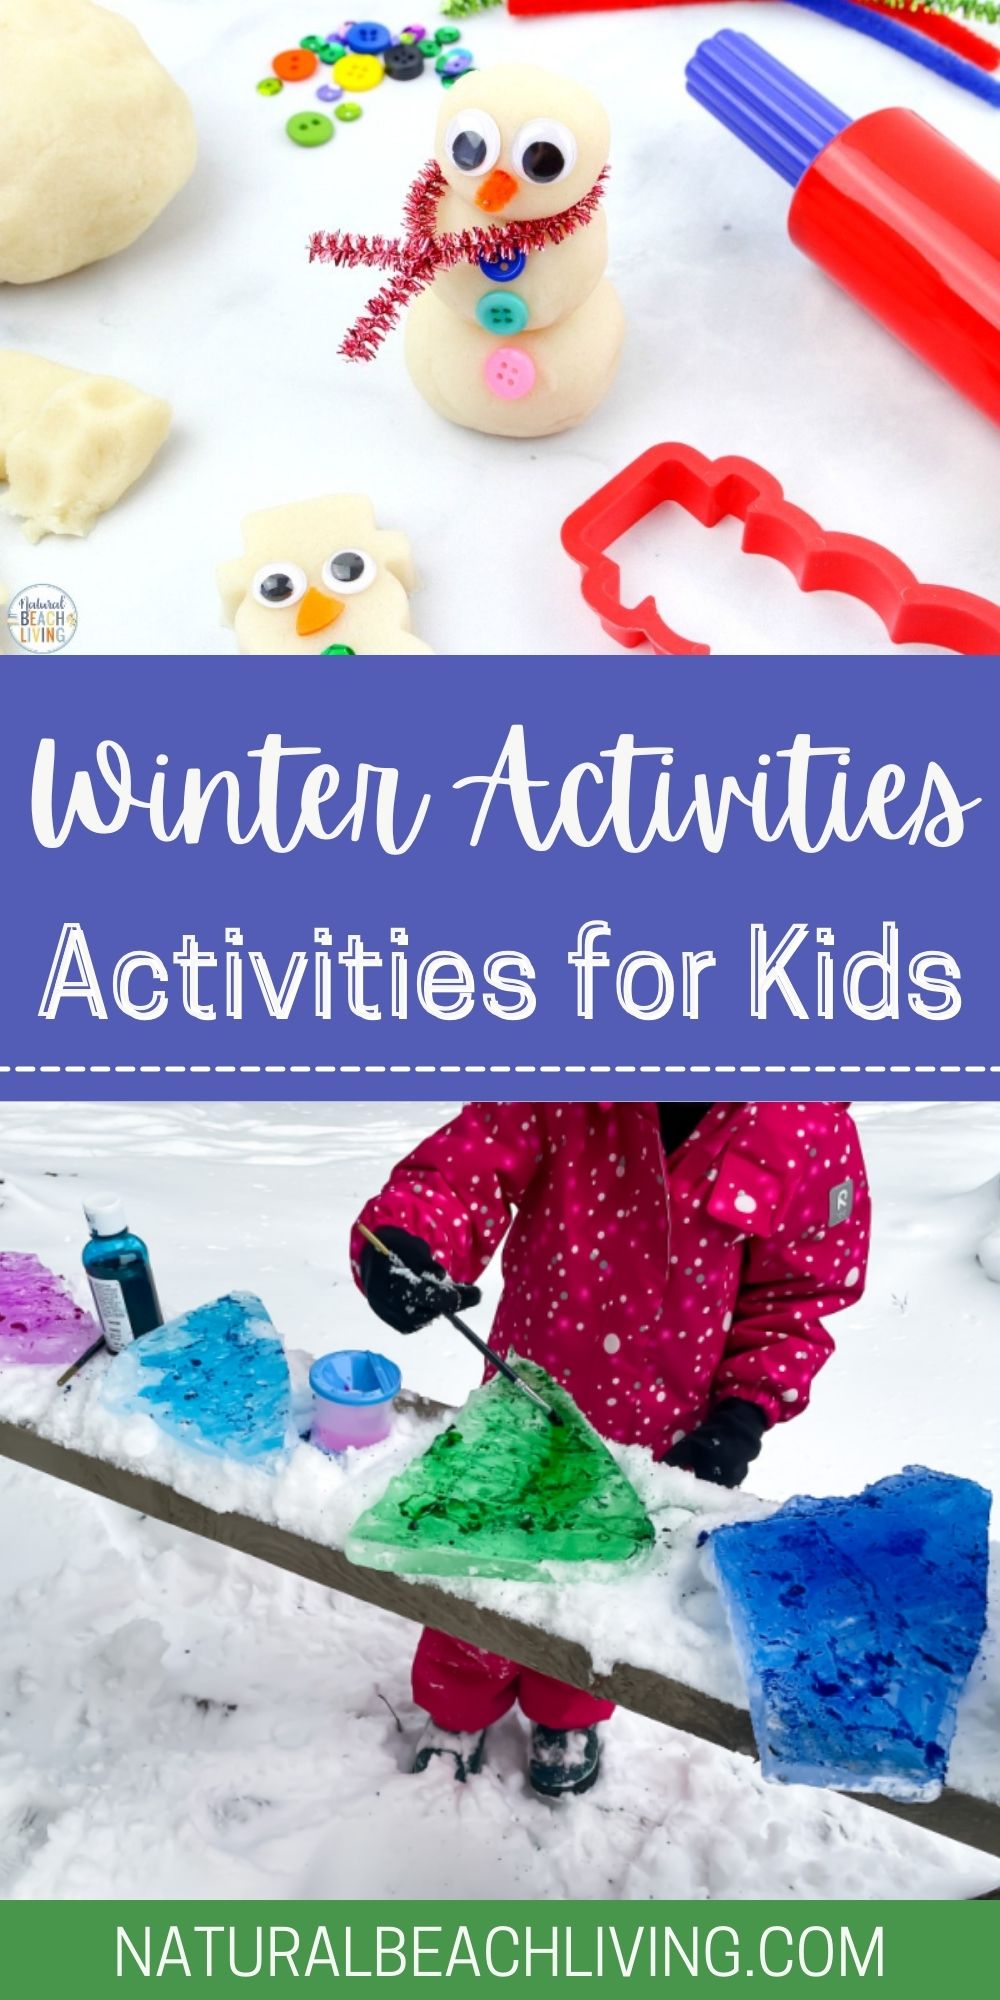 Ice Painting is a Fun Winter Activity for Kids. Kids love painting rainbows and making ice crystal houses, Ice Cube Painting Rainbow Art is a simple way for kids to express themselves creatively. Have fun making art with Ice